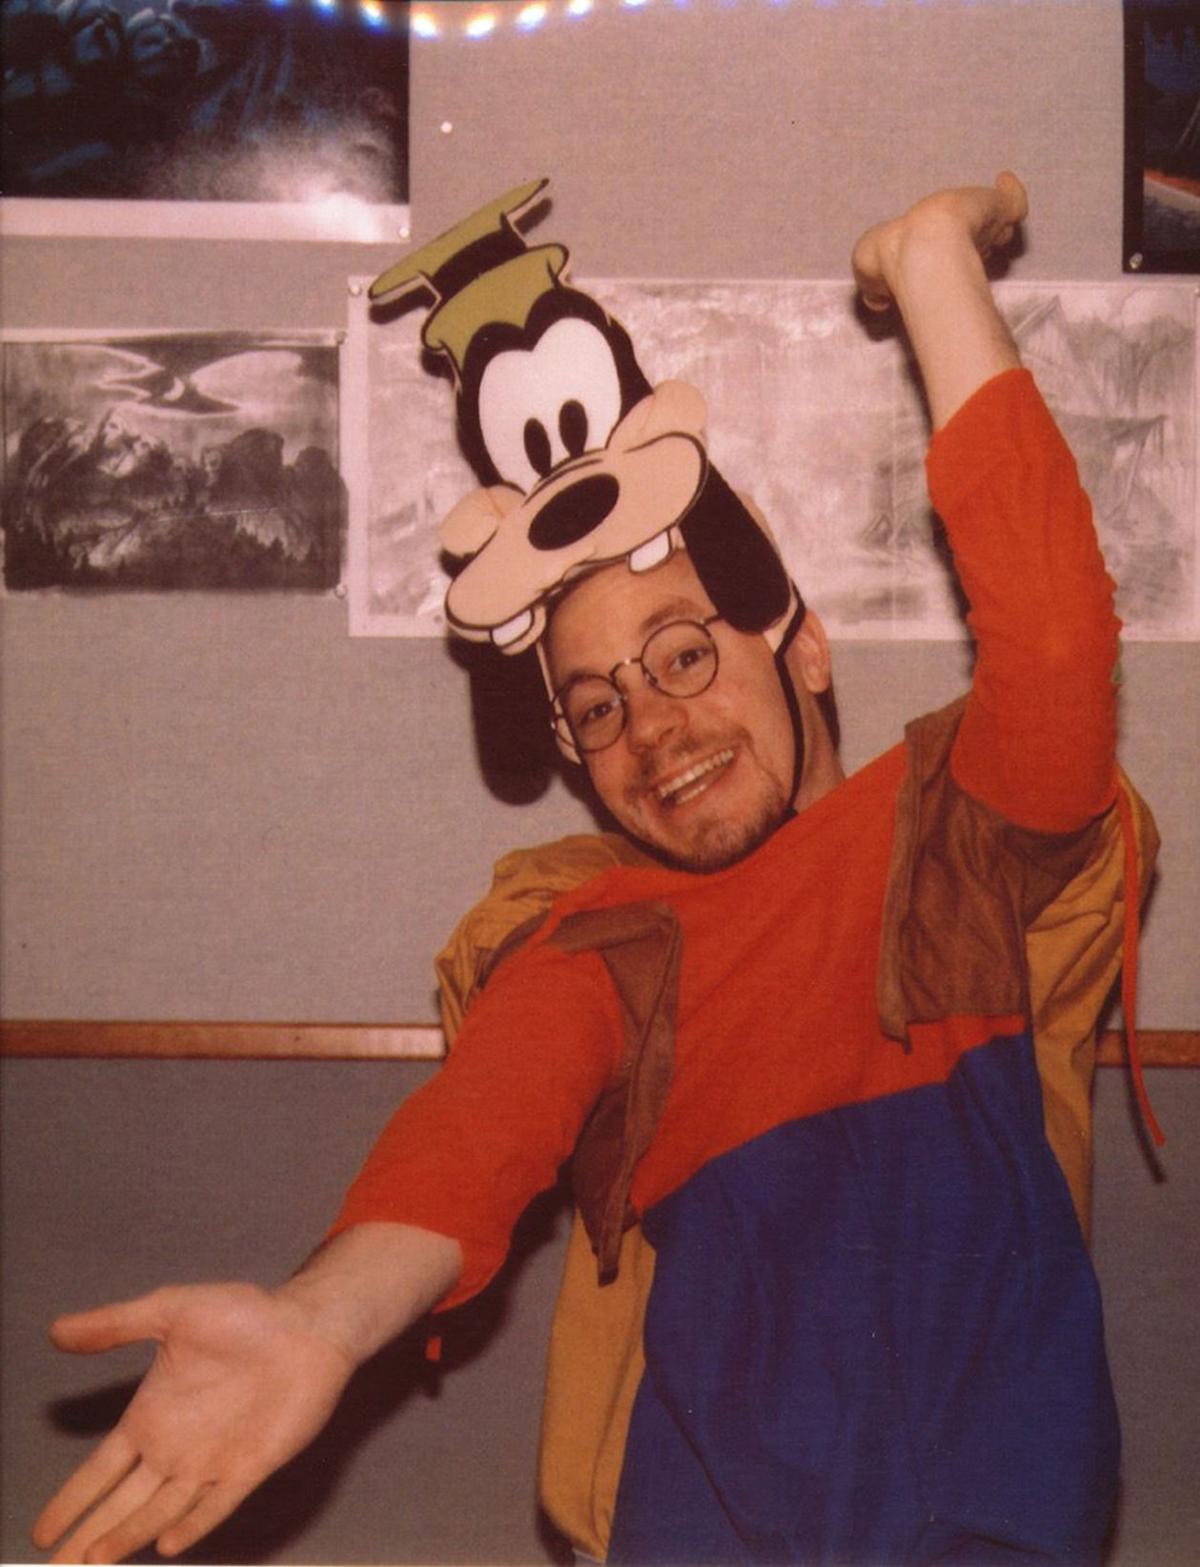 Getting Goofy: Disney alum brings an old friend to Lincoln | GO! | pantagraph.com